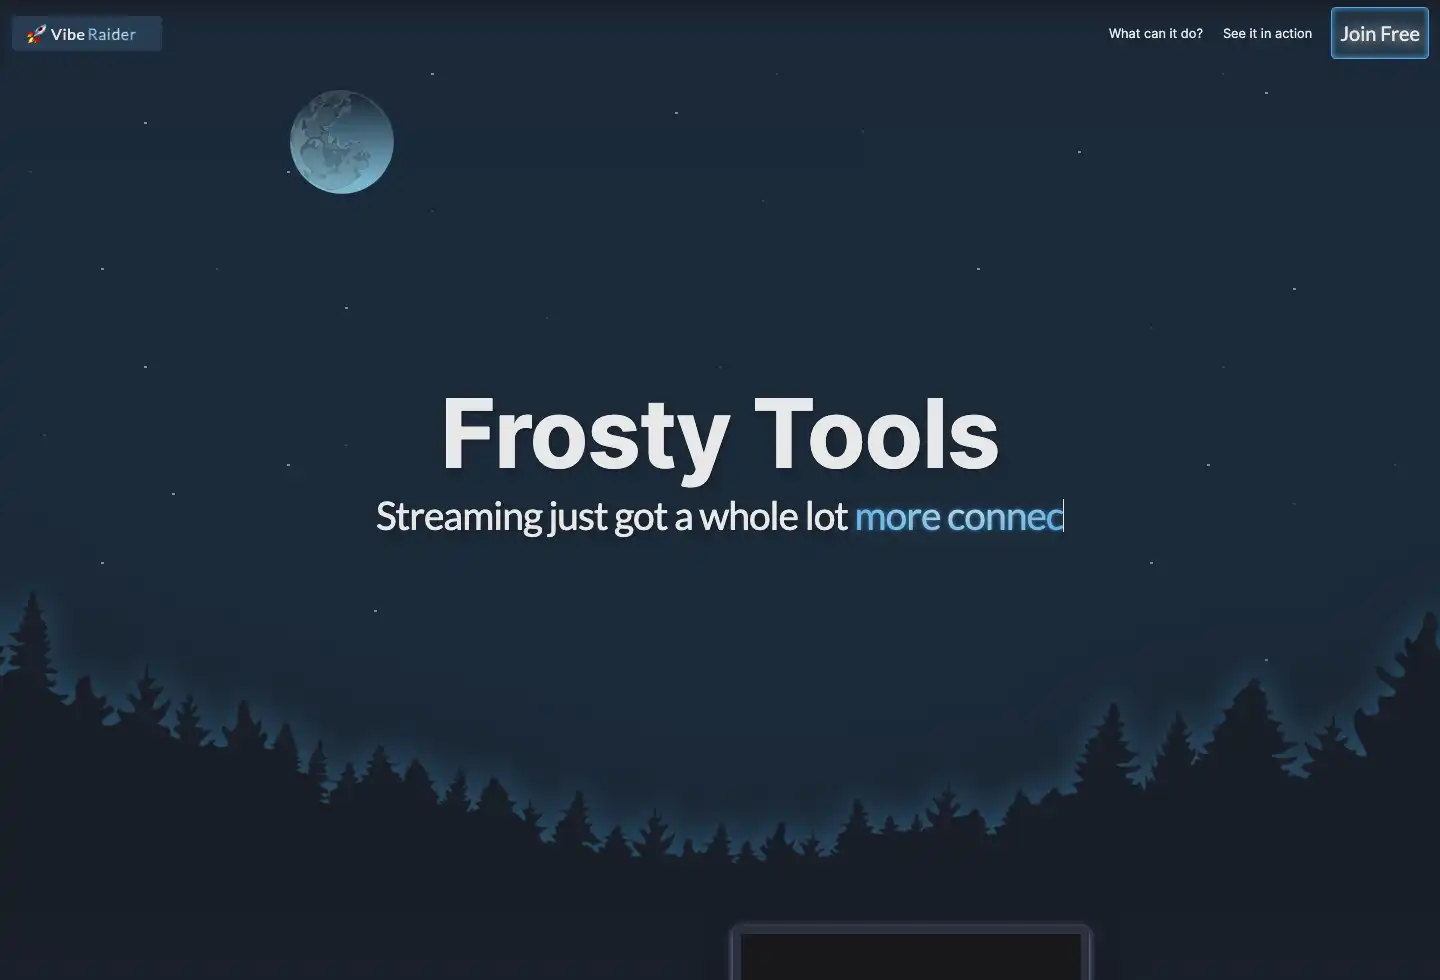 Frosty Tools | Streaming just got a whole lot cooler.